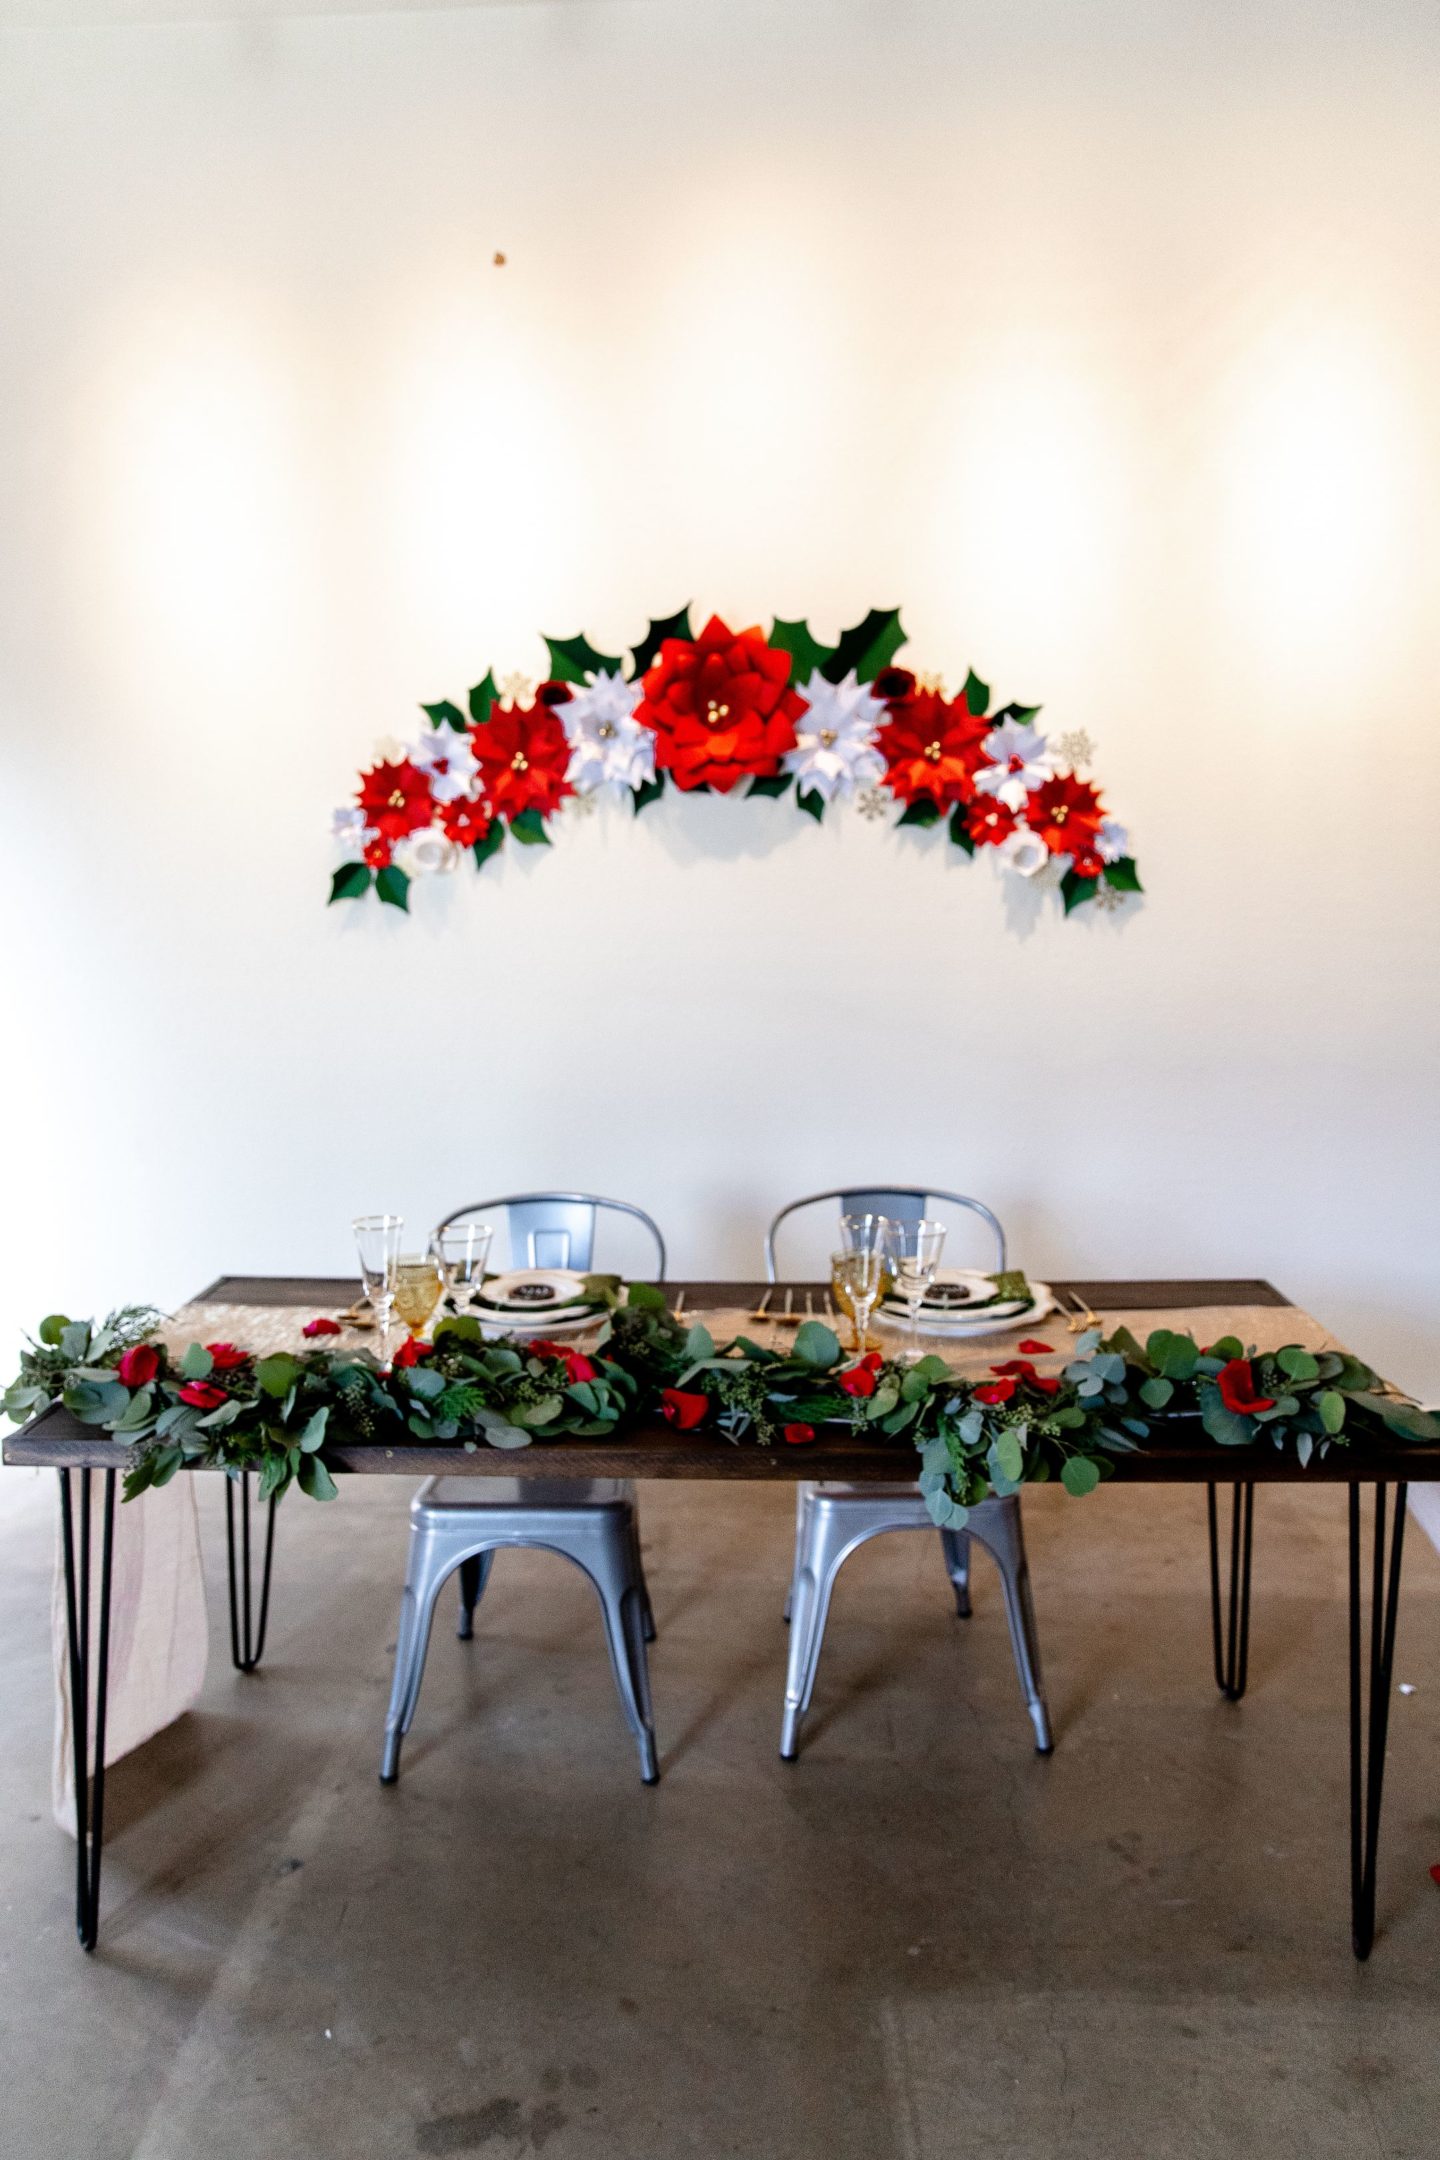 Retro Christmas Wedding With Red and Green Styling at Pop Up Shot Club, USA